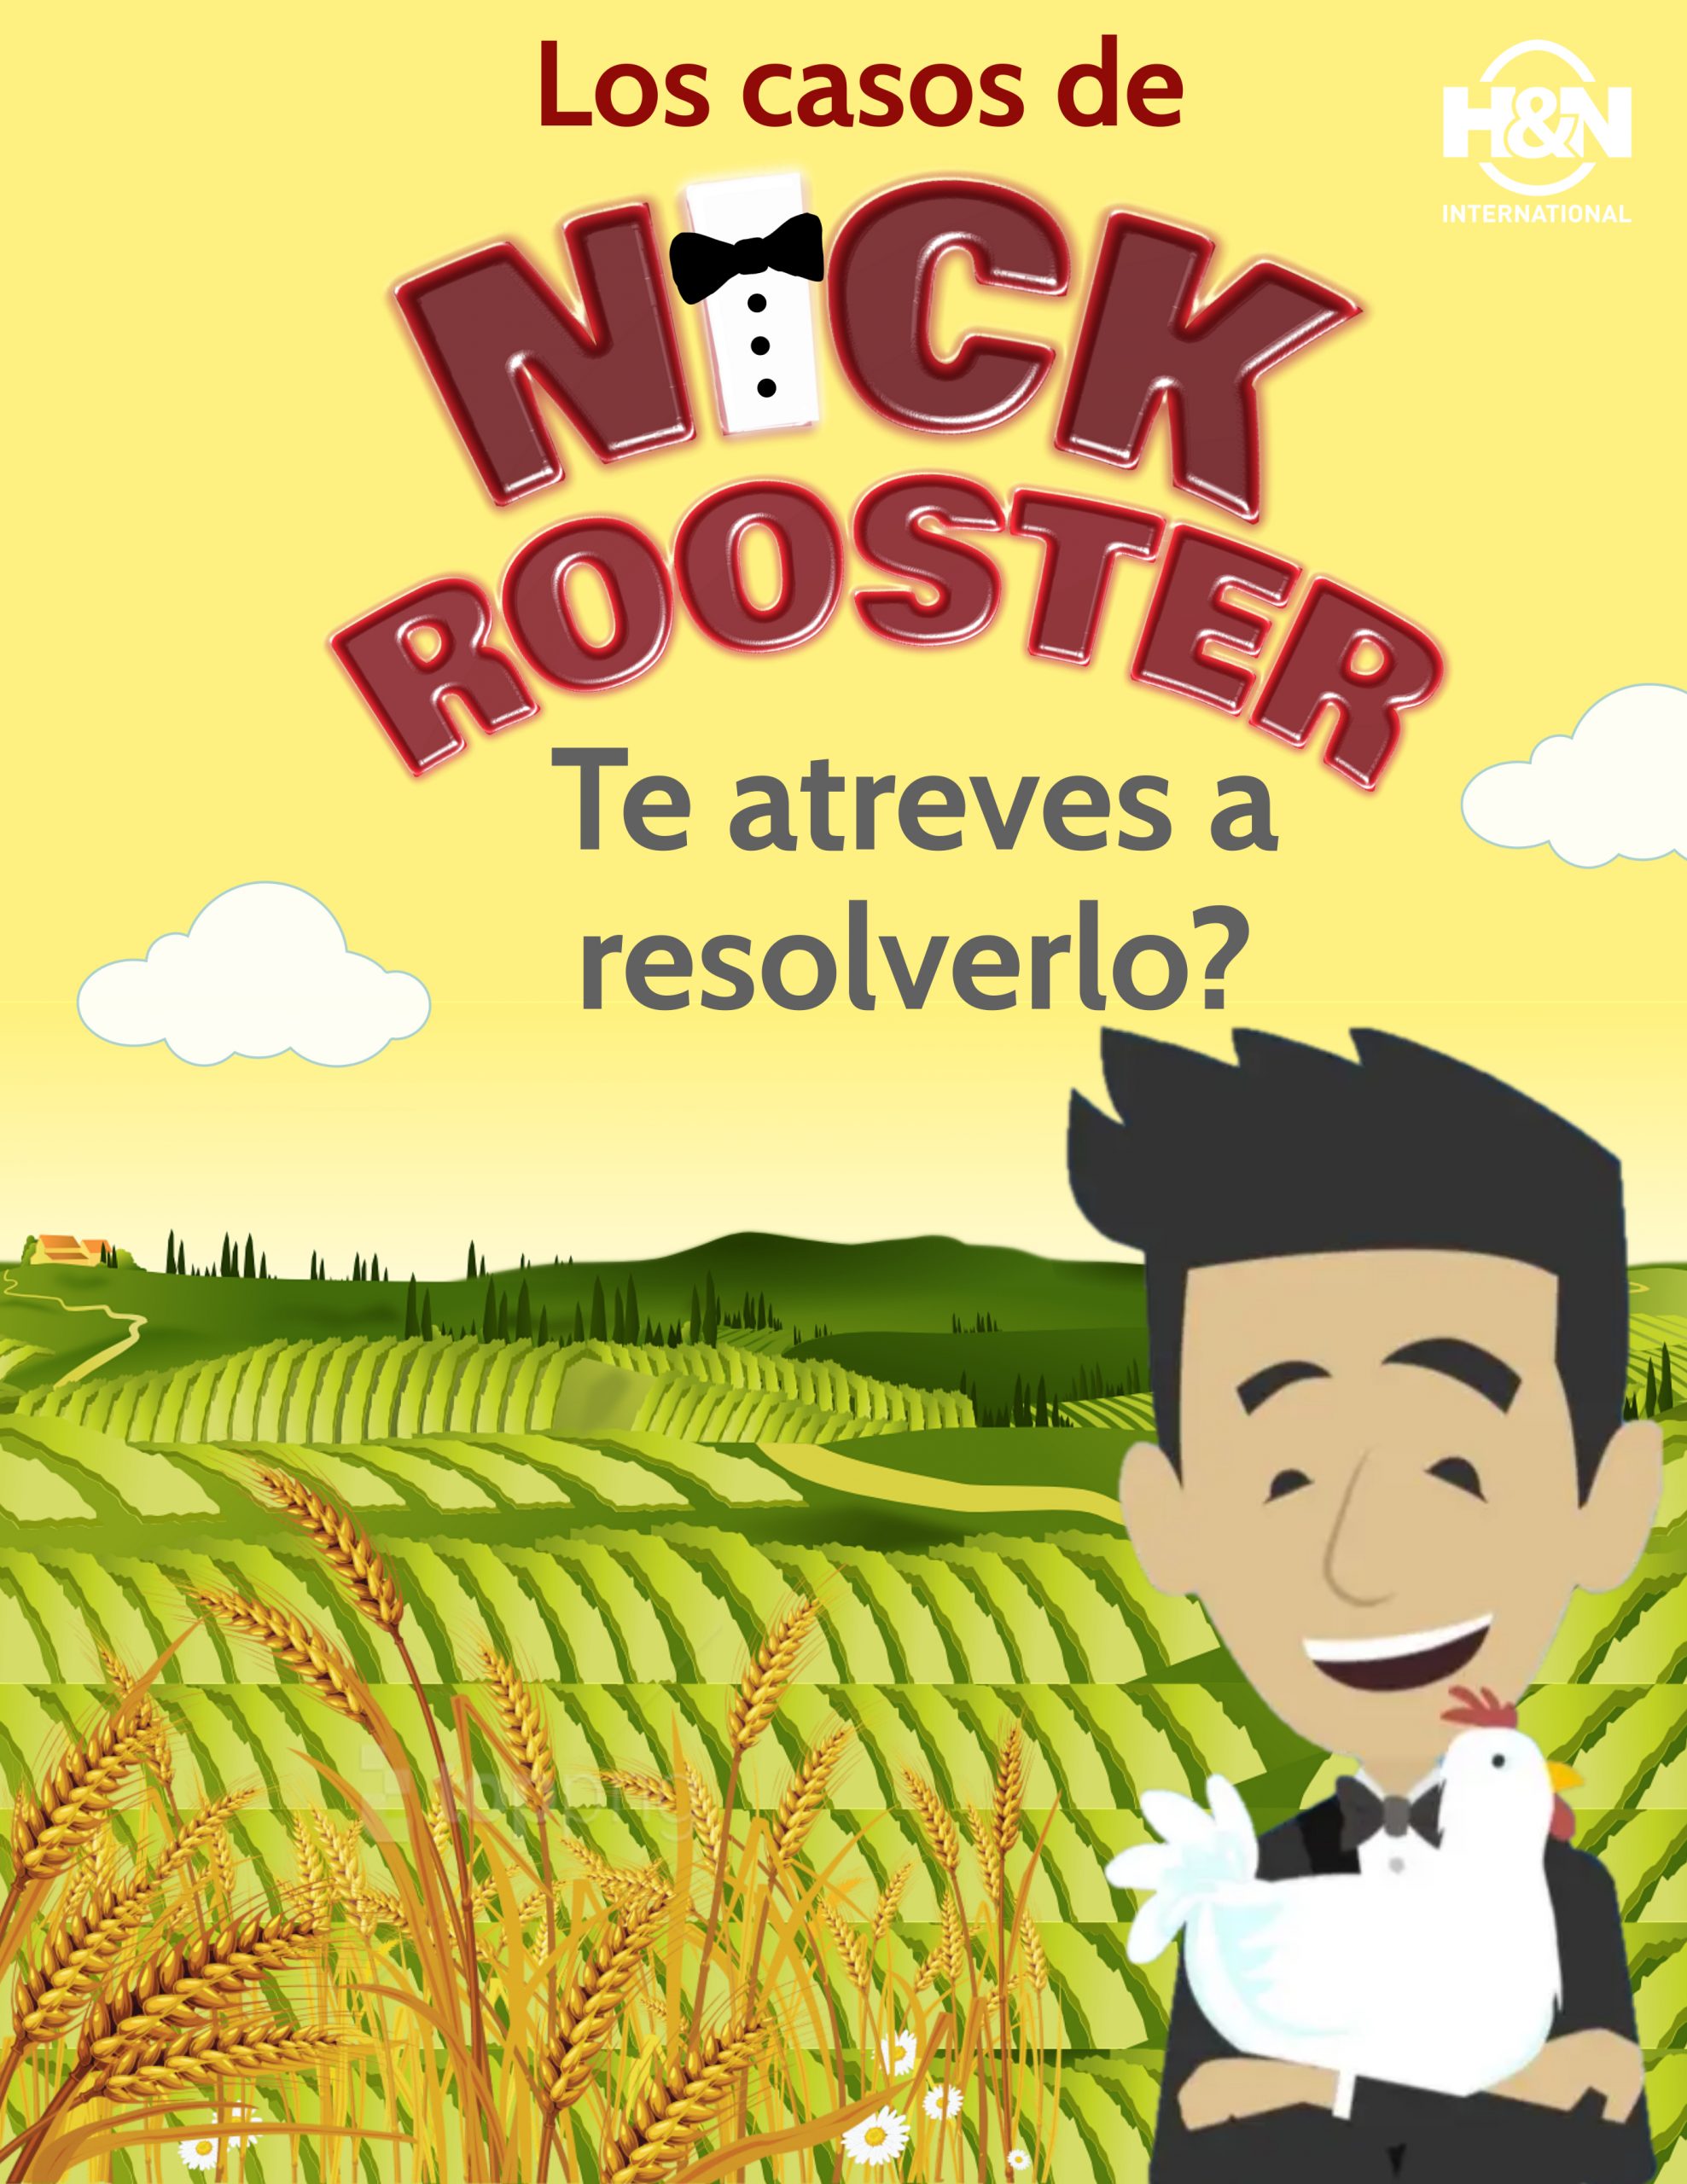 Nick Rooster caso num. 5